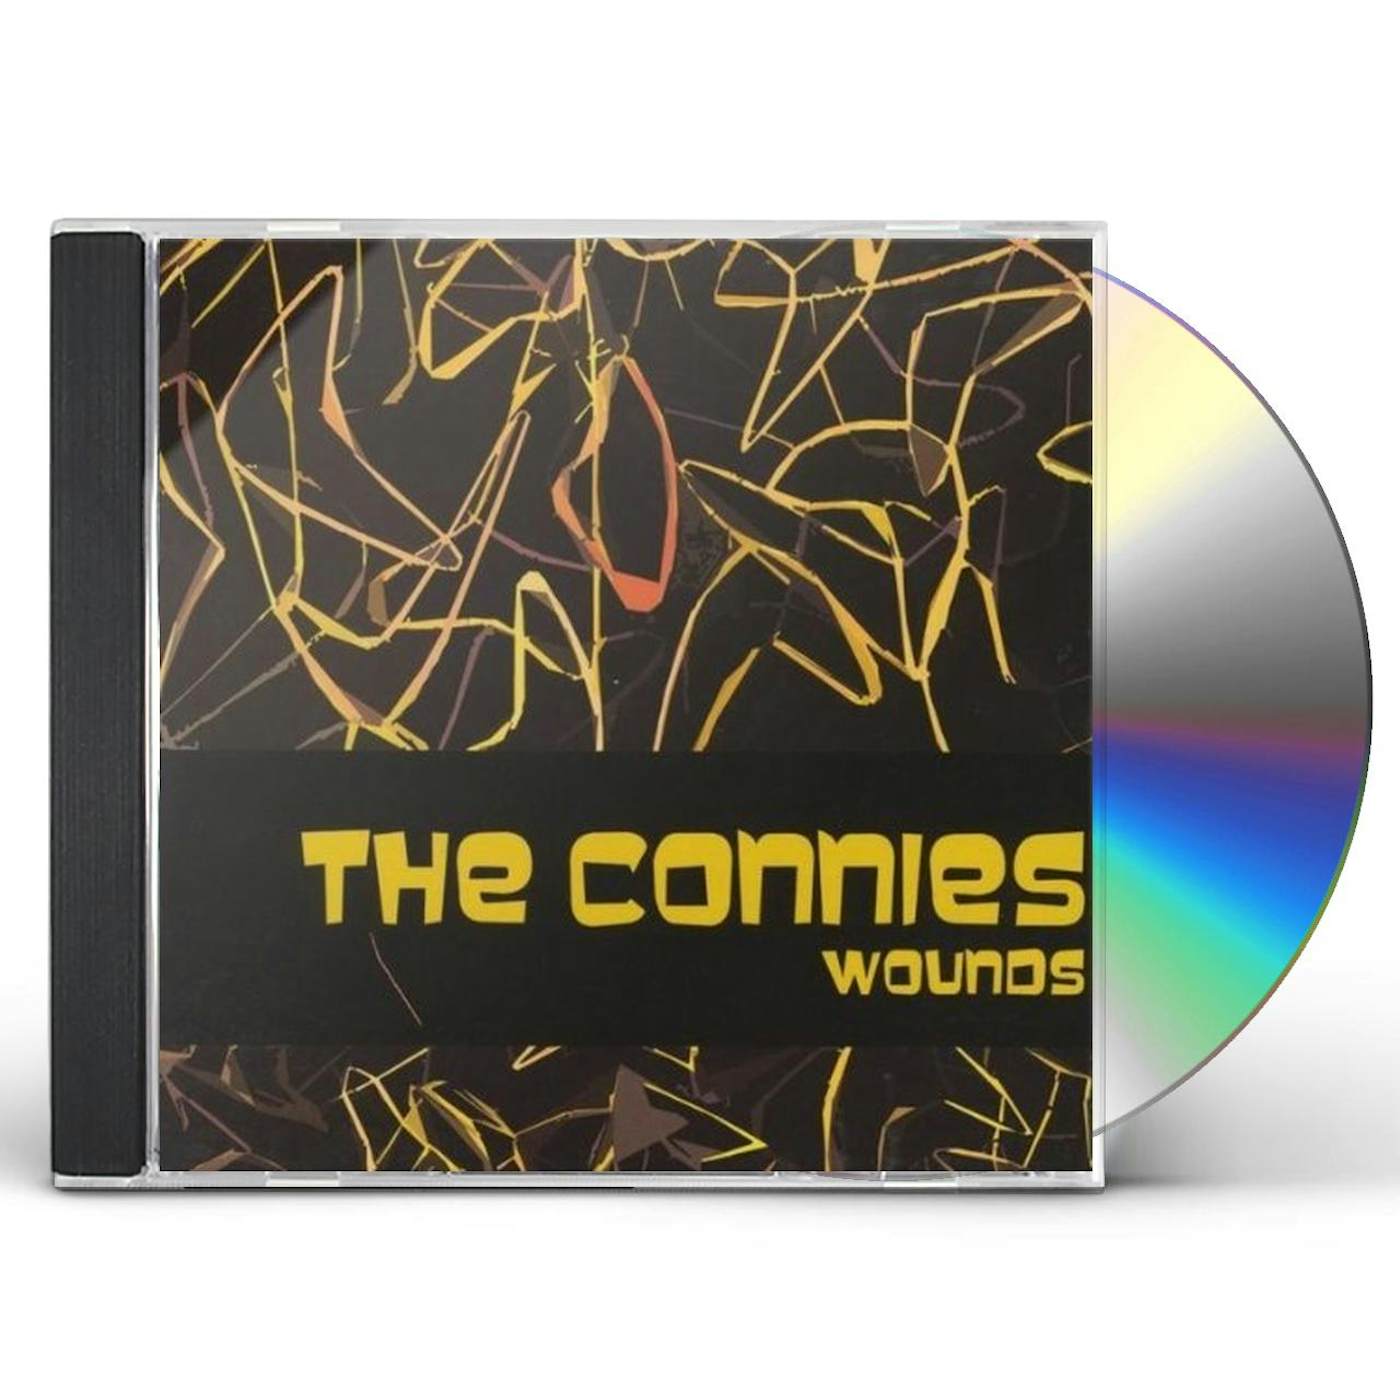 The Connies WOUNDS CD